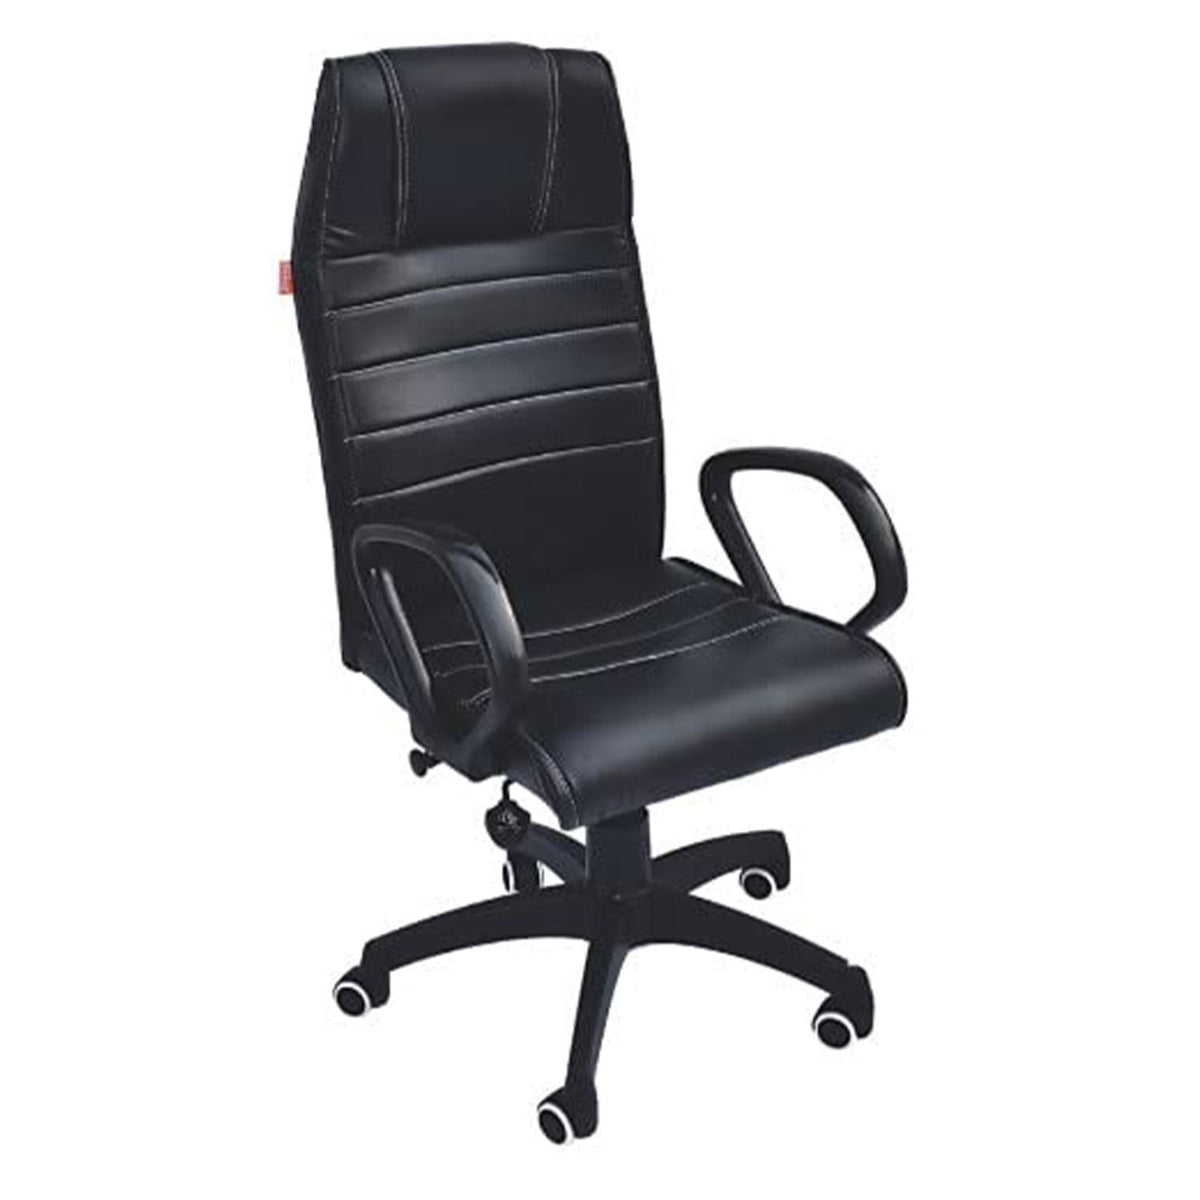 SmileSellers Ergonomic HIGH Back Cushion Office Chair Premium LEATHERETTTE Material and Super Comfy (HIGH Back, Gloss Black)